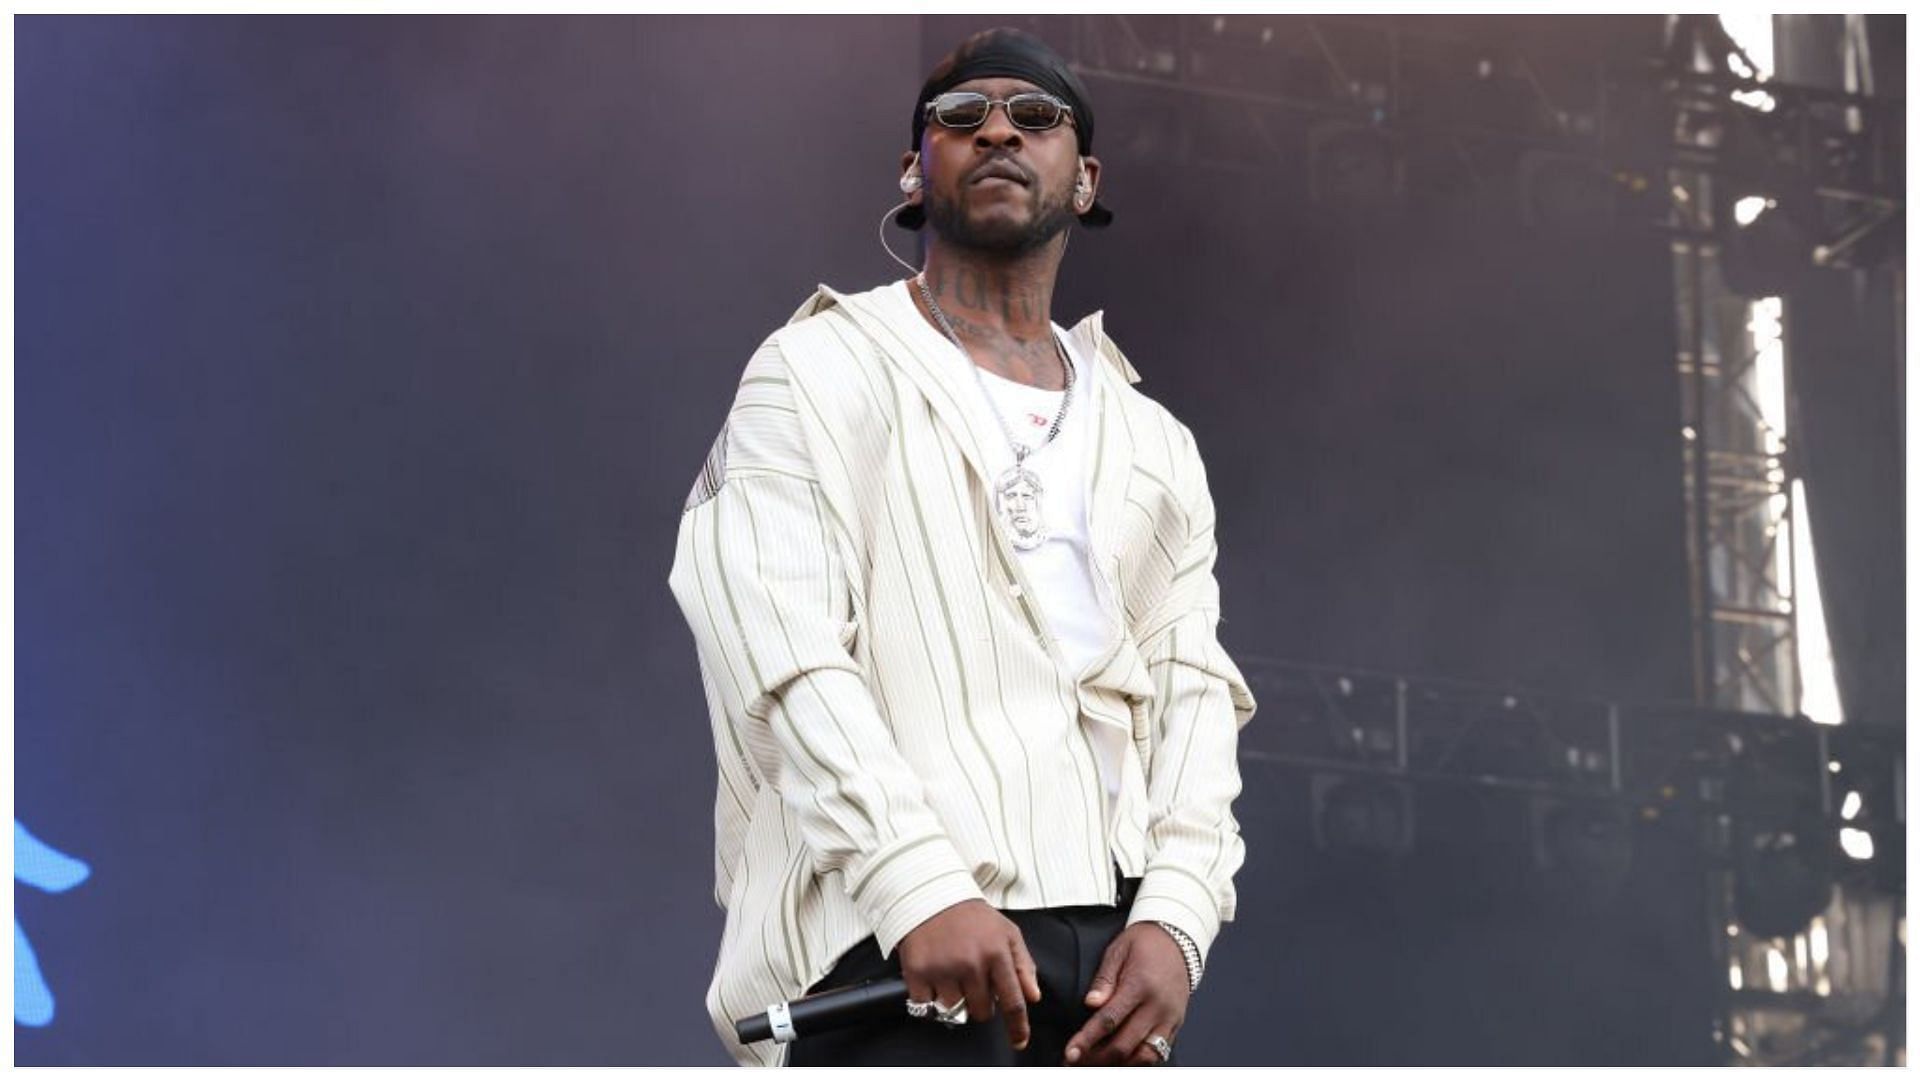 Skepta was recenty hospitalised for undisclosed health reasons (Image via Taylor Hill/Getty Images)